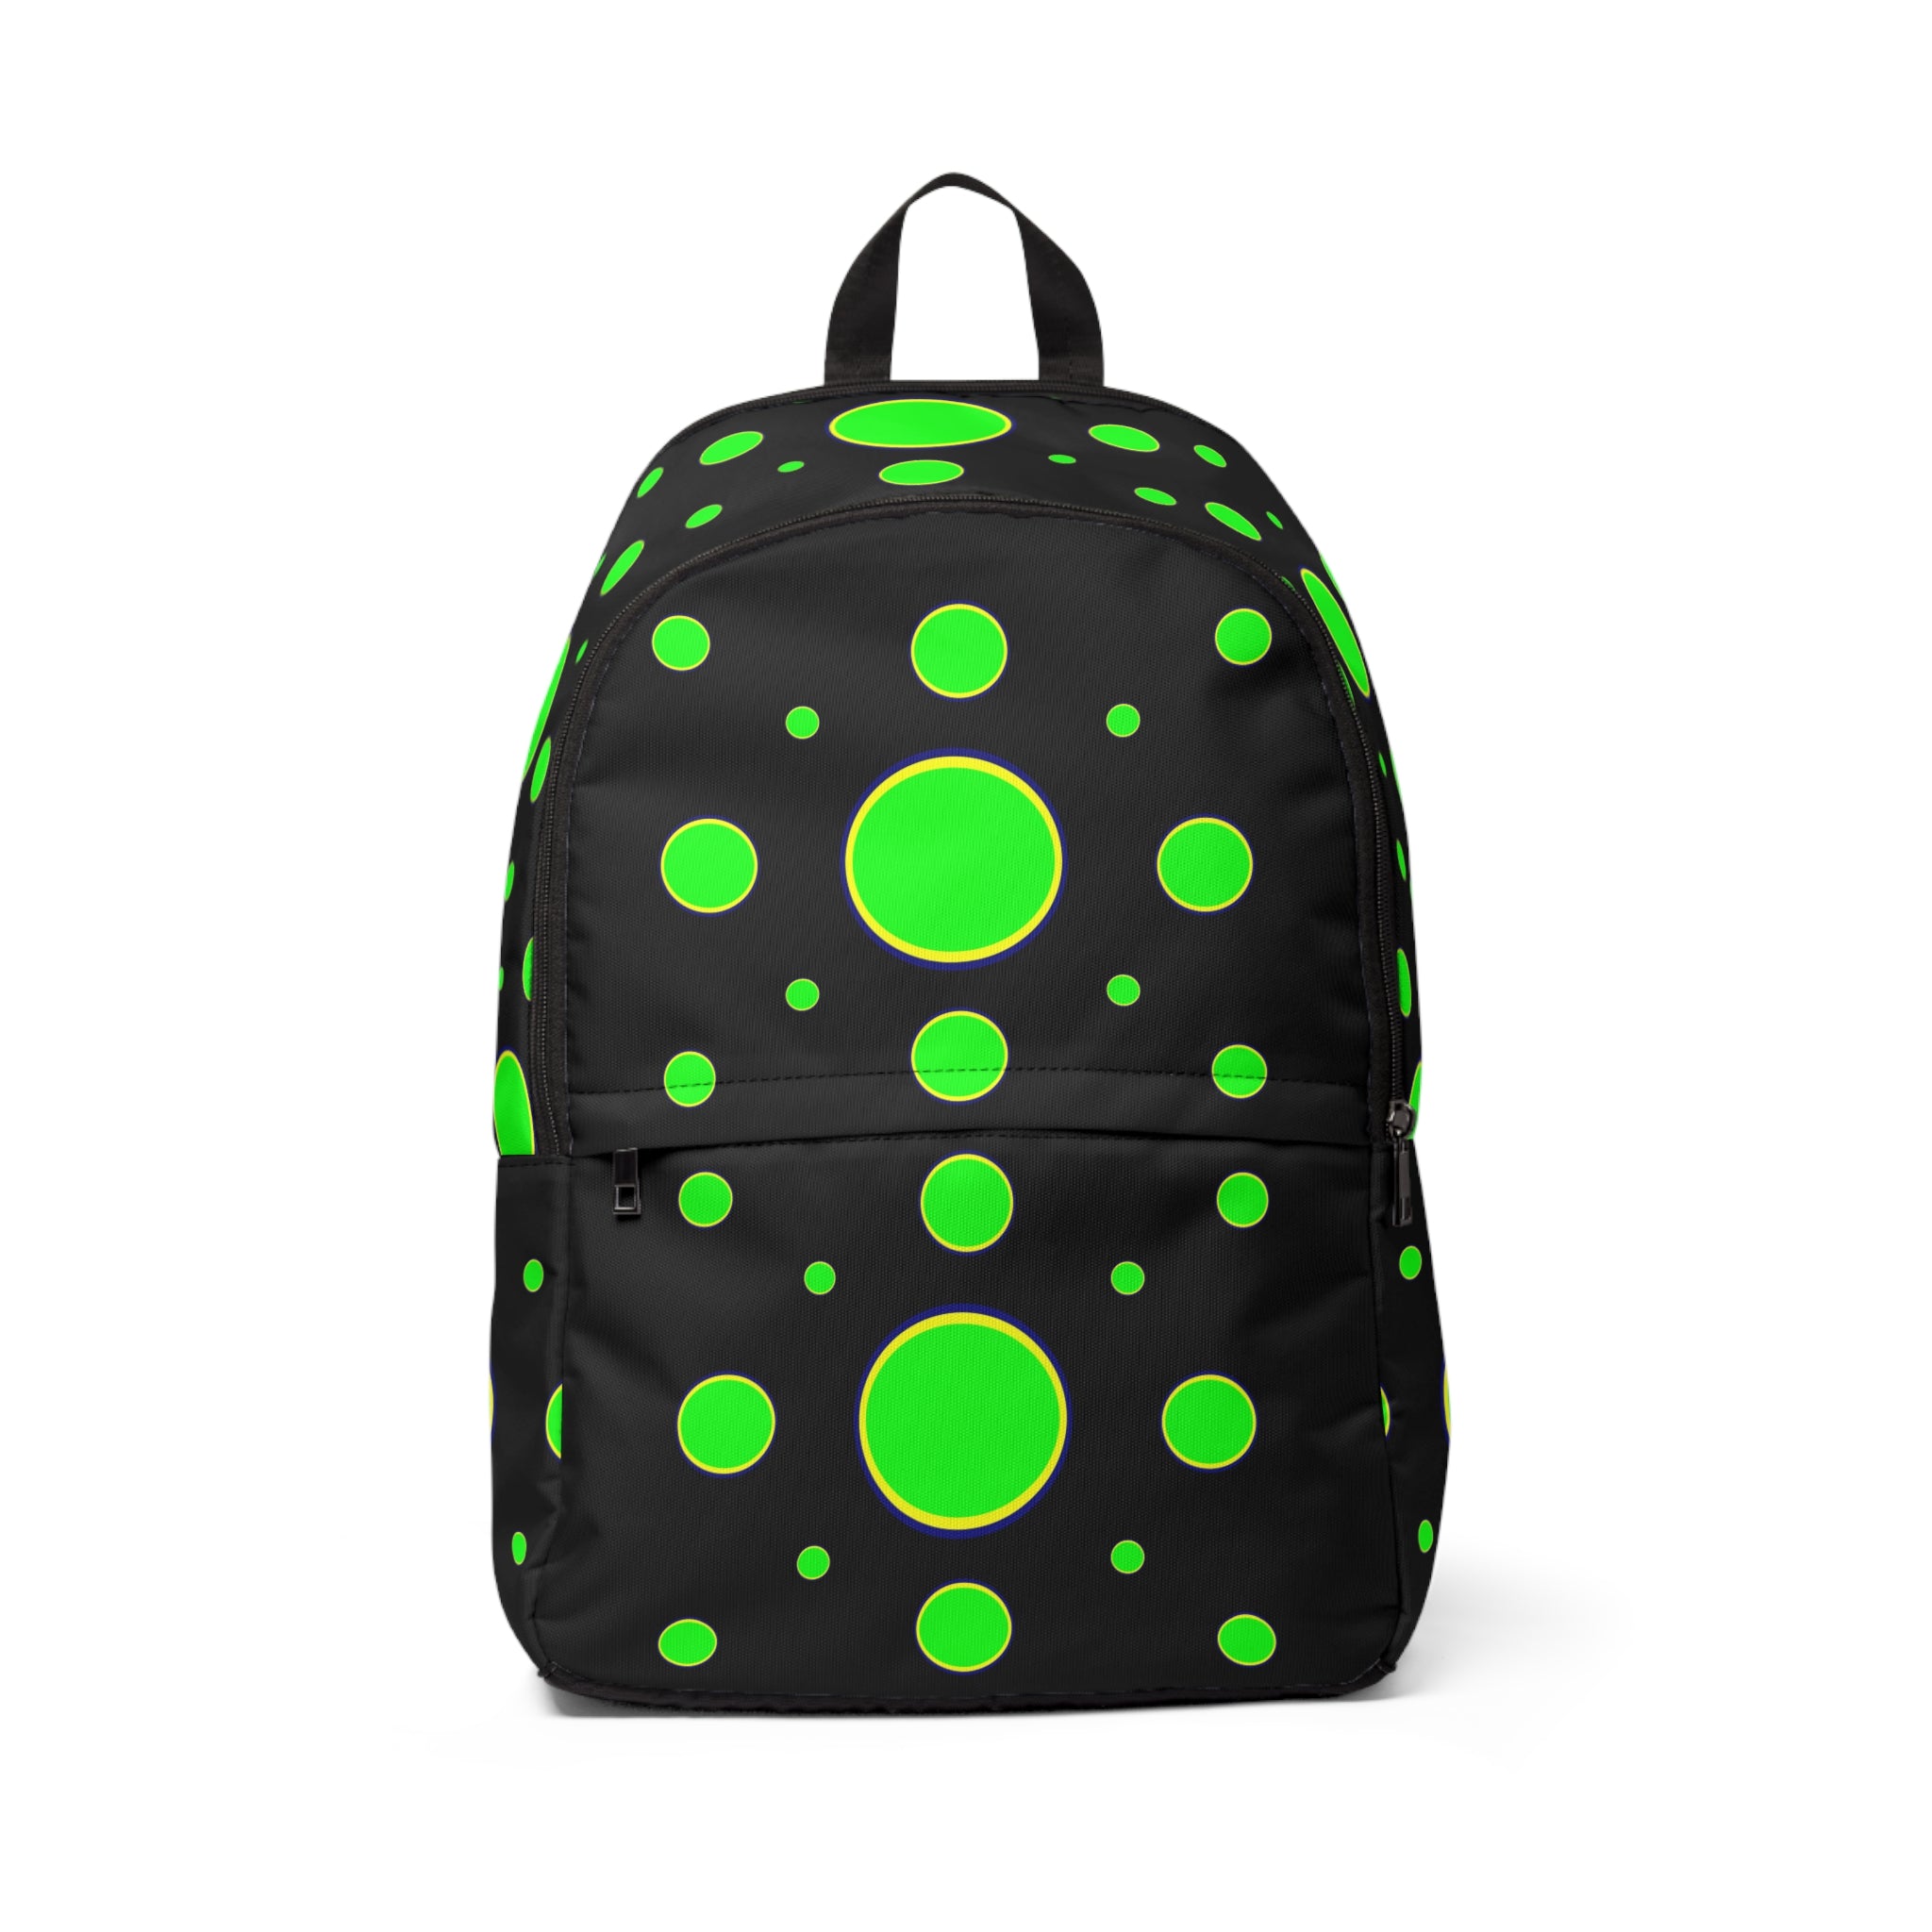 black unisex backpack with green spots